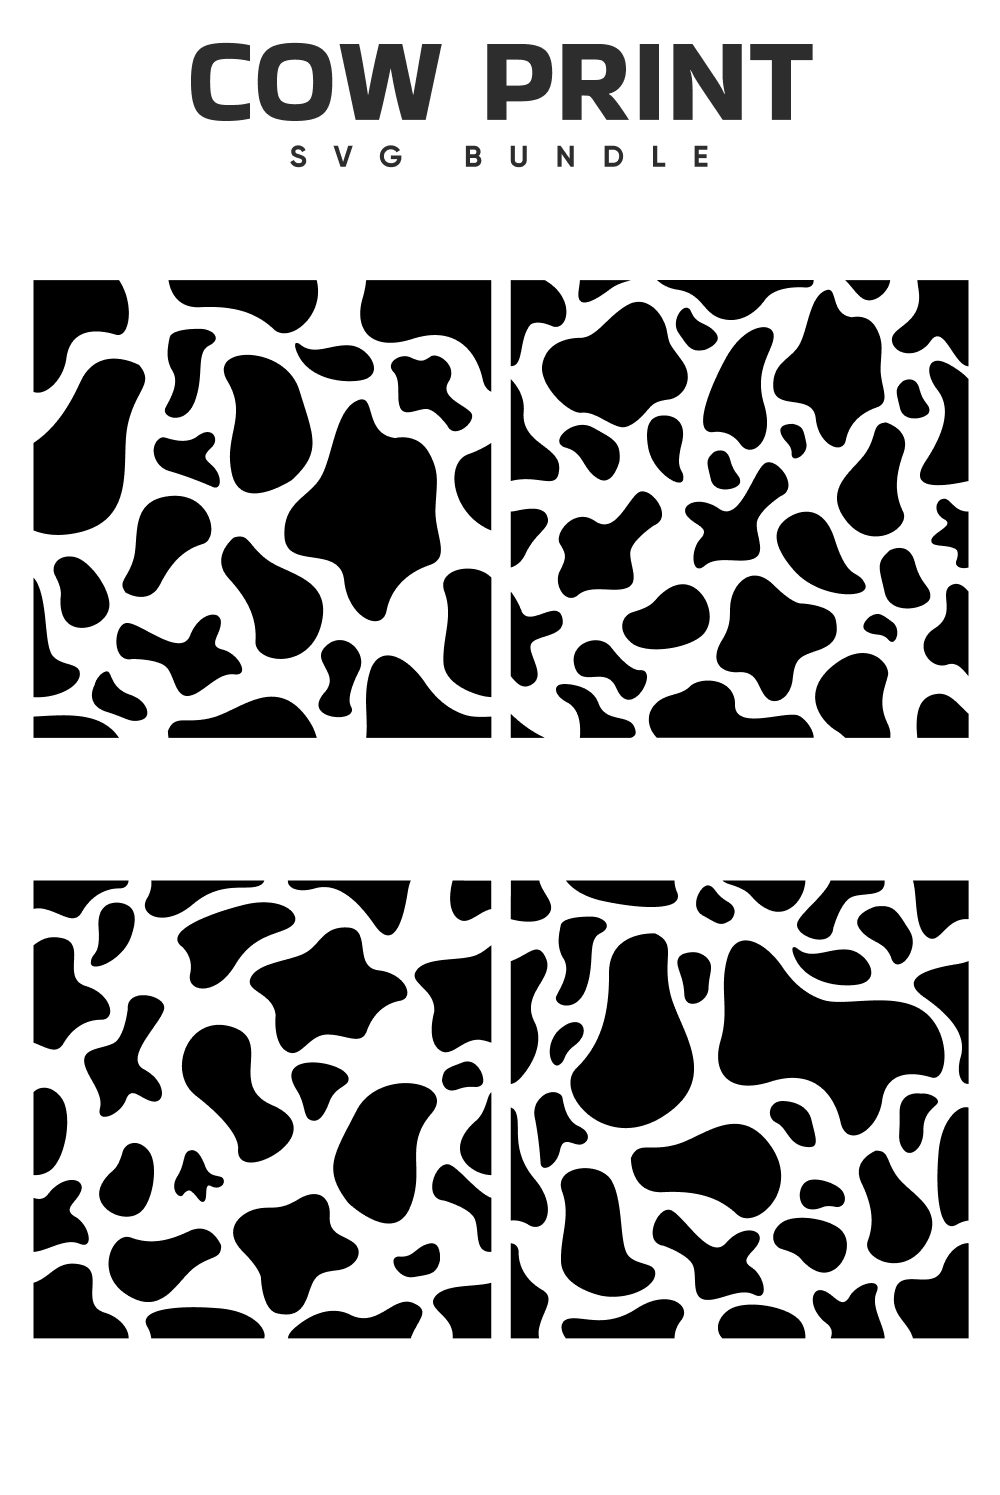 Cow print is shown in black and white.